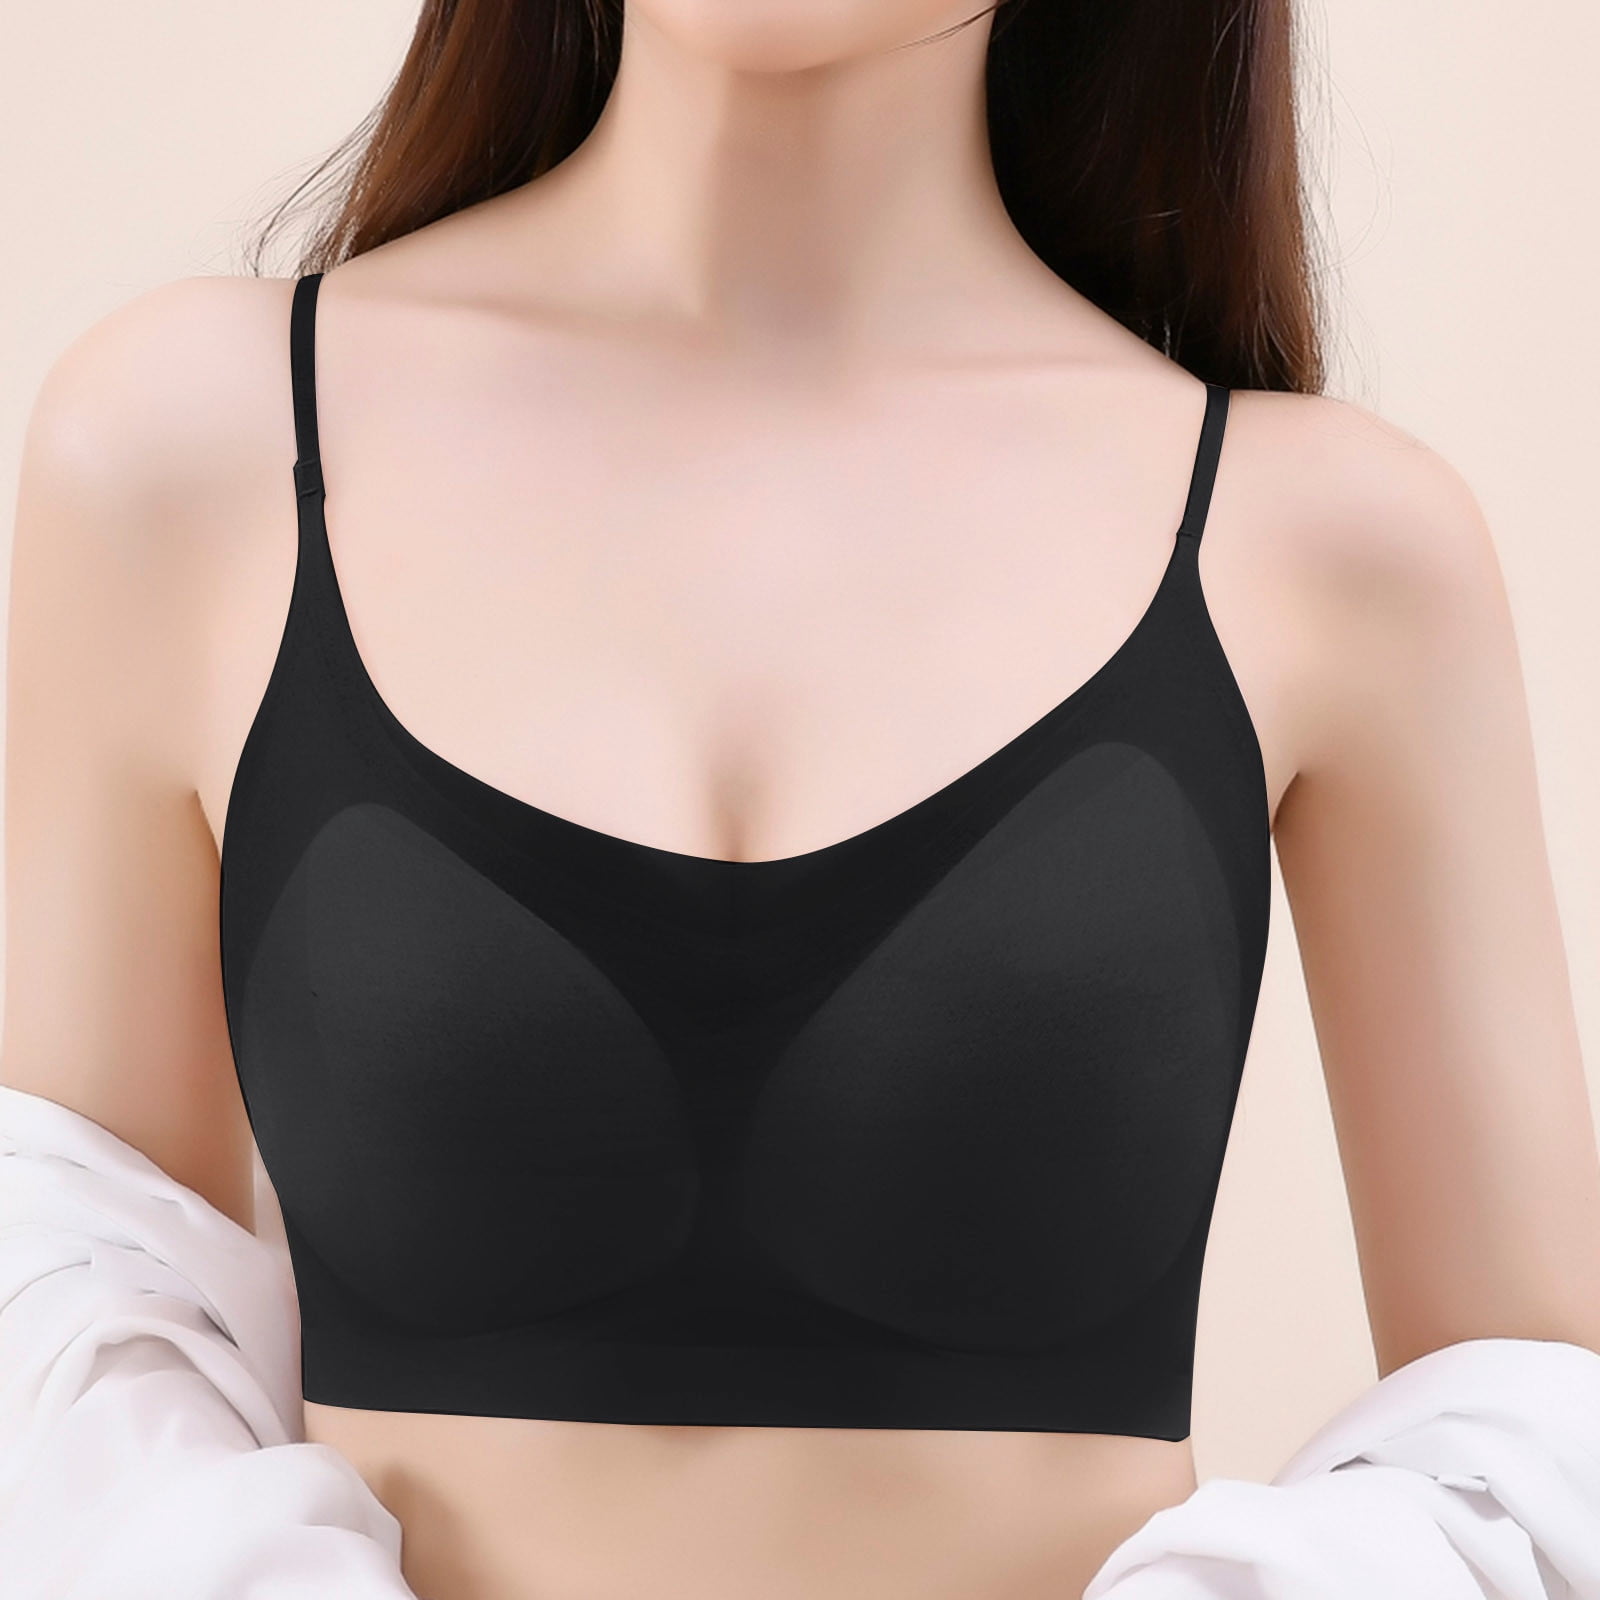 CAICJ98 Sports Bras for Women Support Wireless Bra, Lace Bra with  Stay-in-Place Straps, Full-Coverage Wirefree Bra, Tagless for Everyday Wear  Black,XXL 